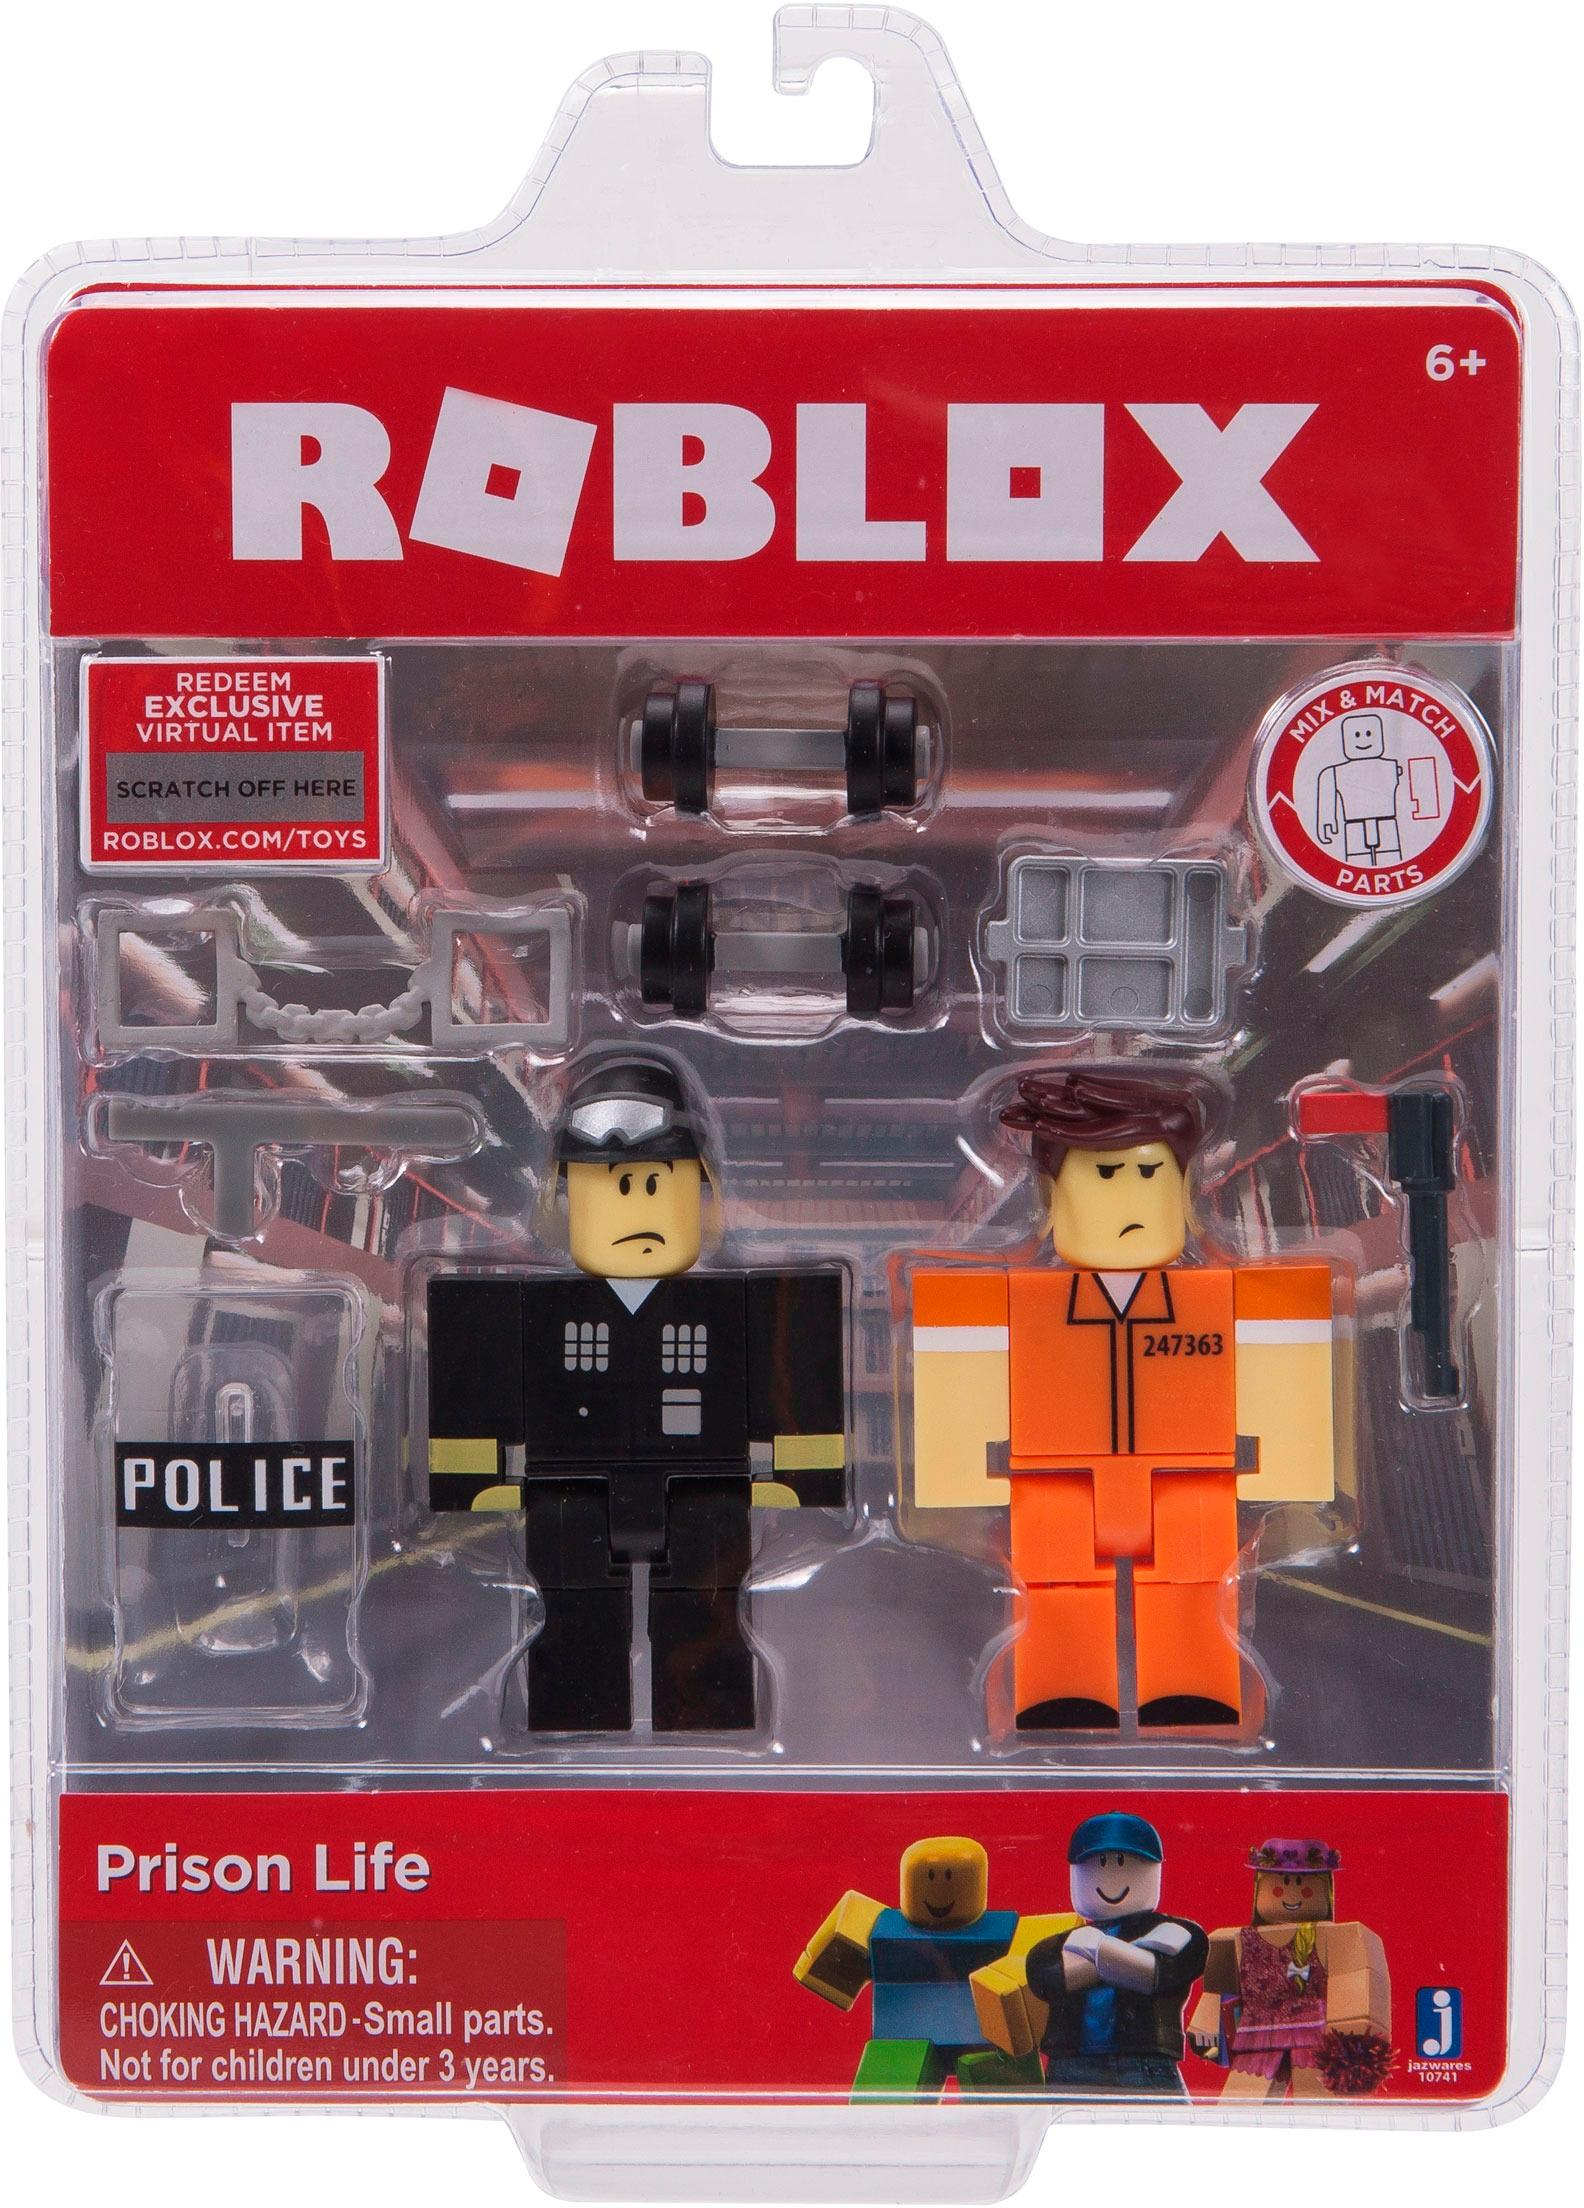 i love this game sm, i might do seek and the figure next #roblox #robl